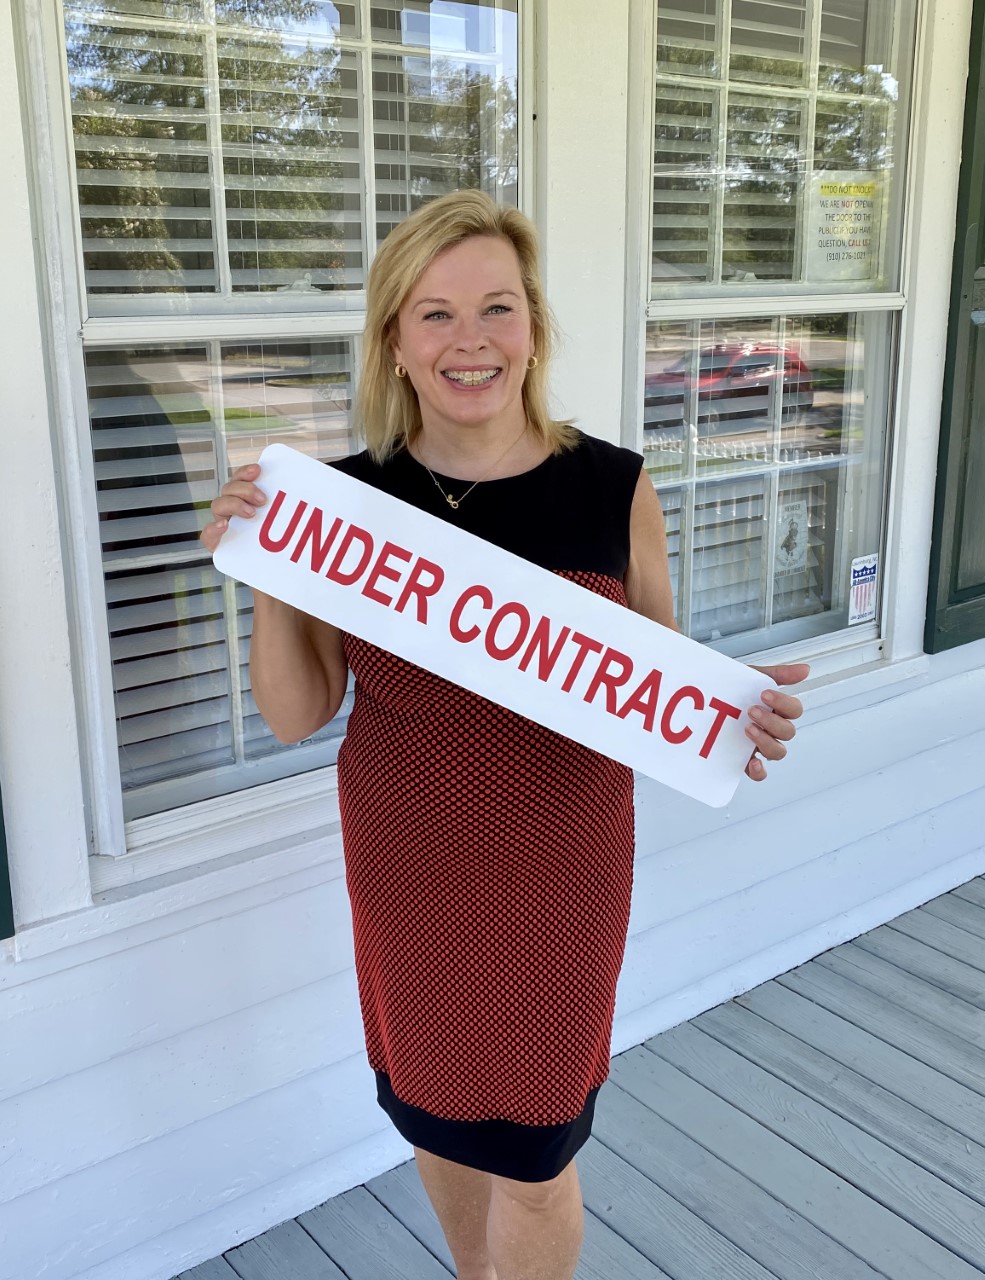 Alicia Krout holds a sign that reads "Under Contract" in front of a house